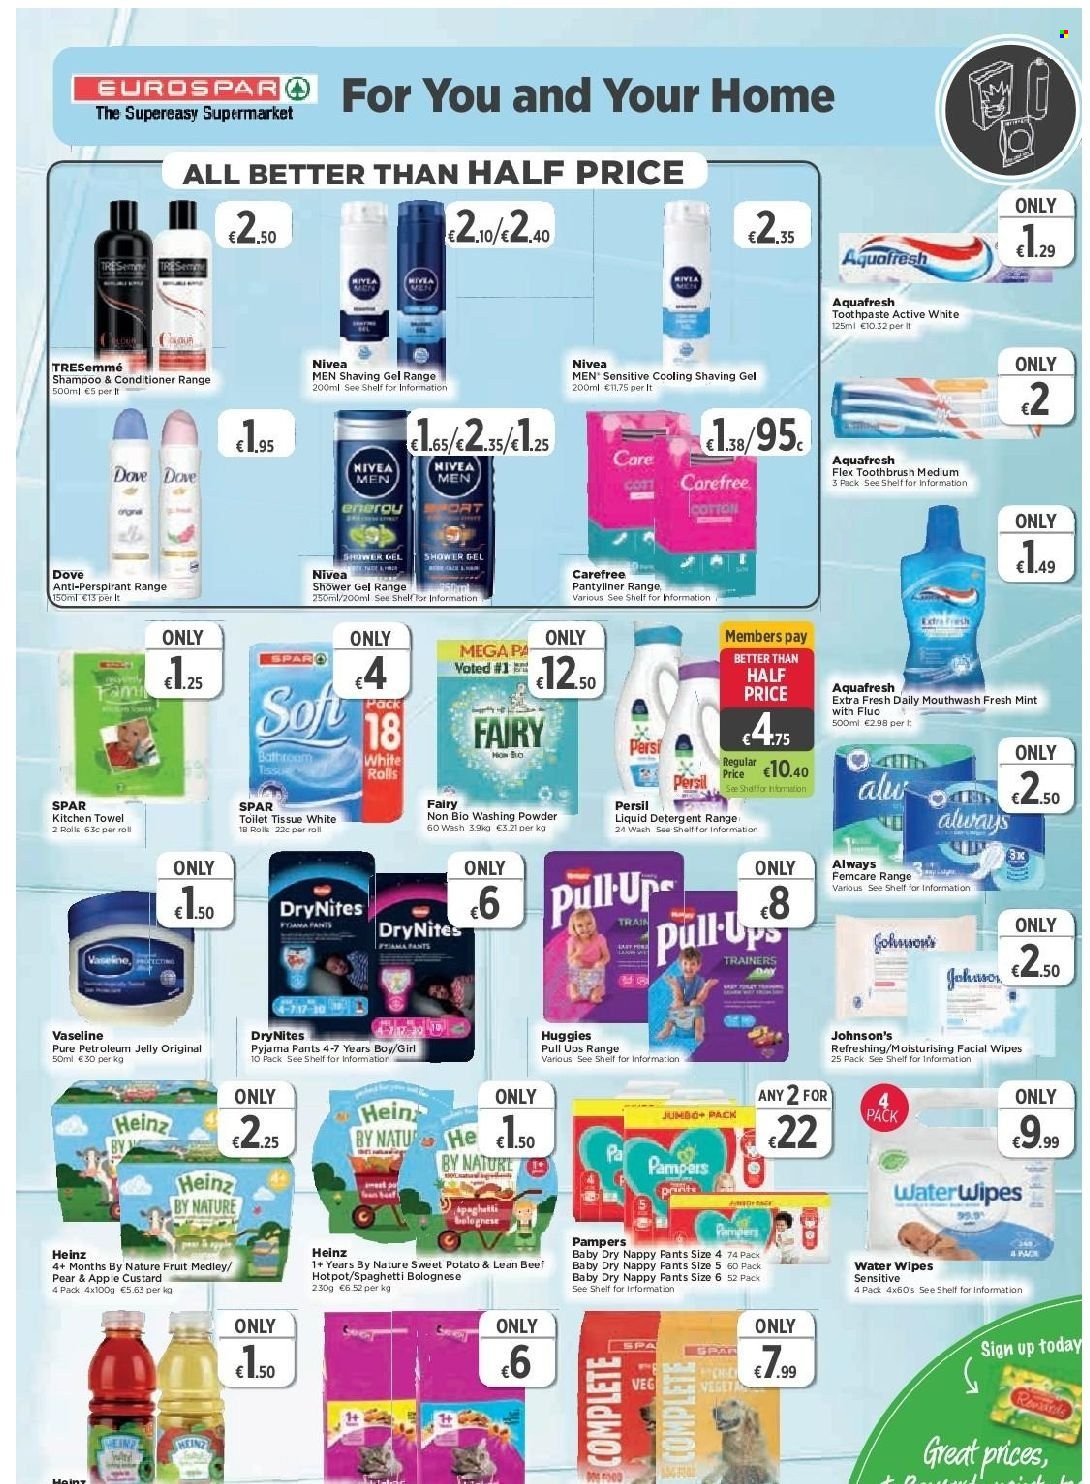 thumbnail - EUROSPAR offer  - 30.09.2021 - 20.10.2021 - Sales products - spaghetti, custard, oats, Heinz, L'Or, beef meat, wipes, Huggies, Pampers, pants, nappies, DryNites, Johnson's, Nivea, petroleum jelly, Dove, toilet paper, kitchen towels, detergent, Fairy, Persil, liquid detergent, laundry powder, shampoo, shower gel, Vaseline, toothpaste, mouthwash, Carefree, conditioner, TRESemmé, anti-perspirant, Hama. Page 7.